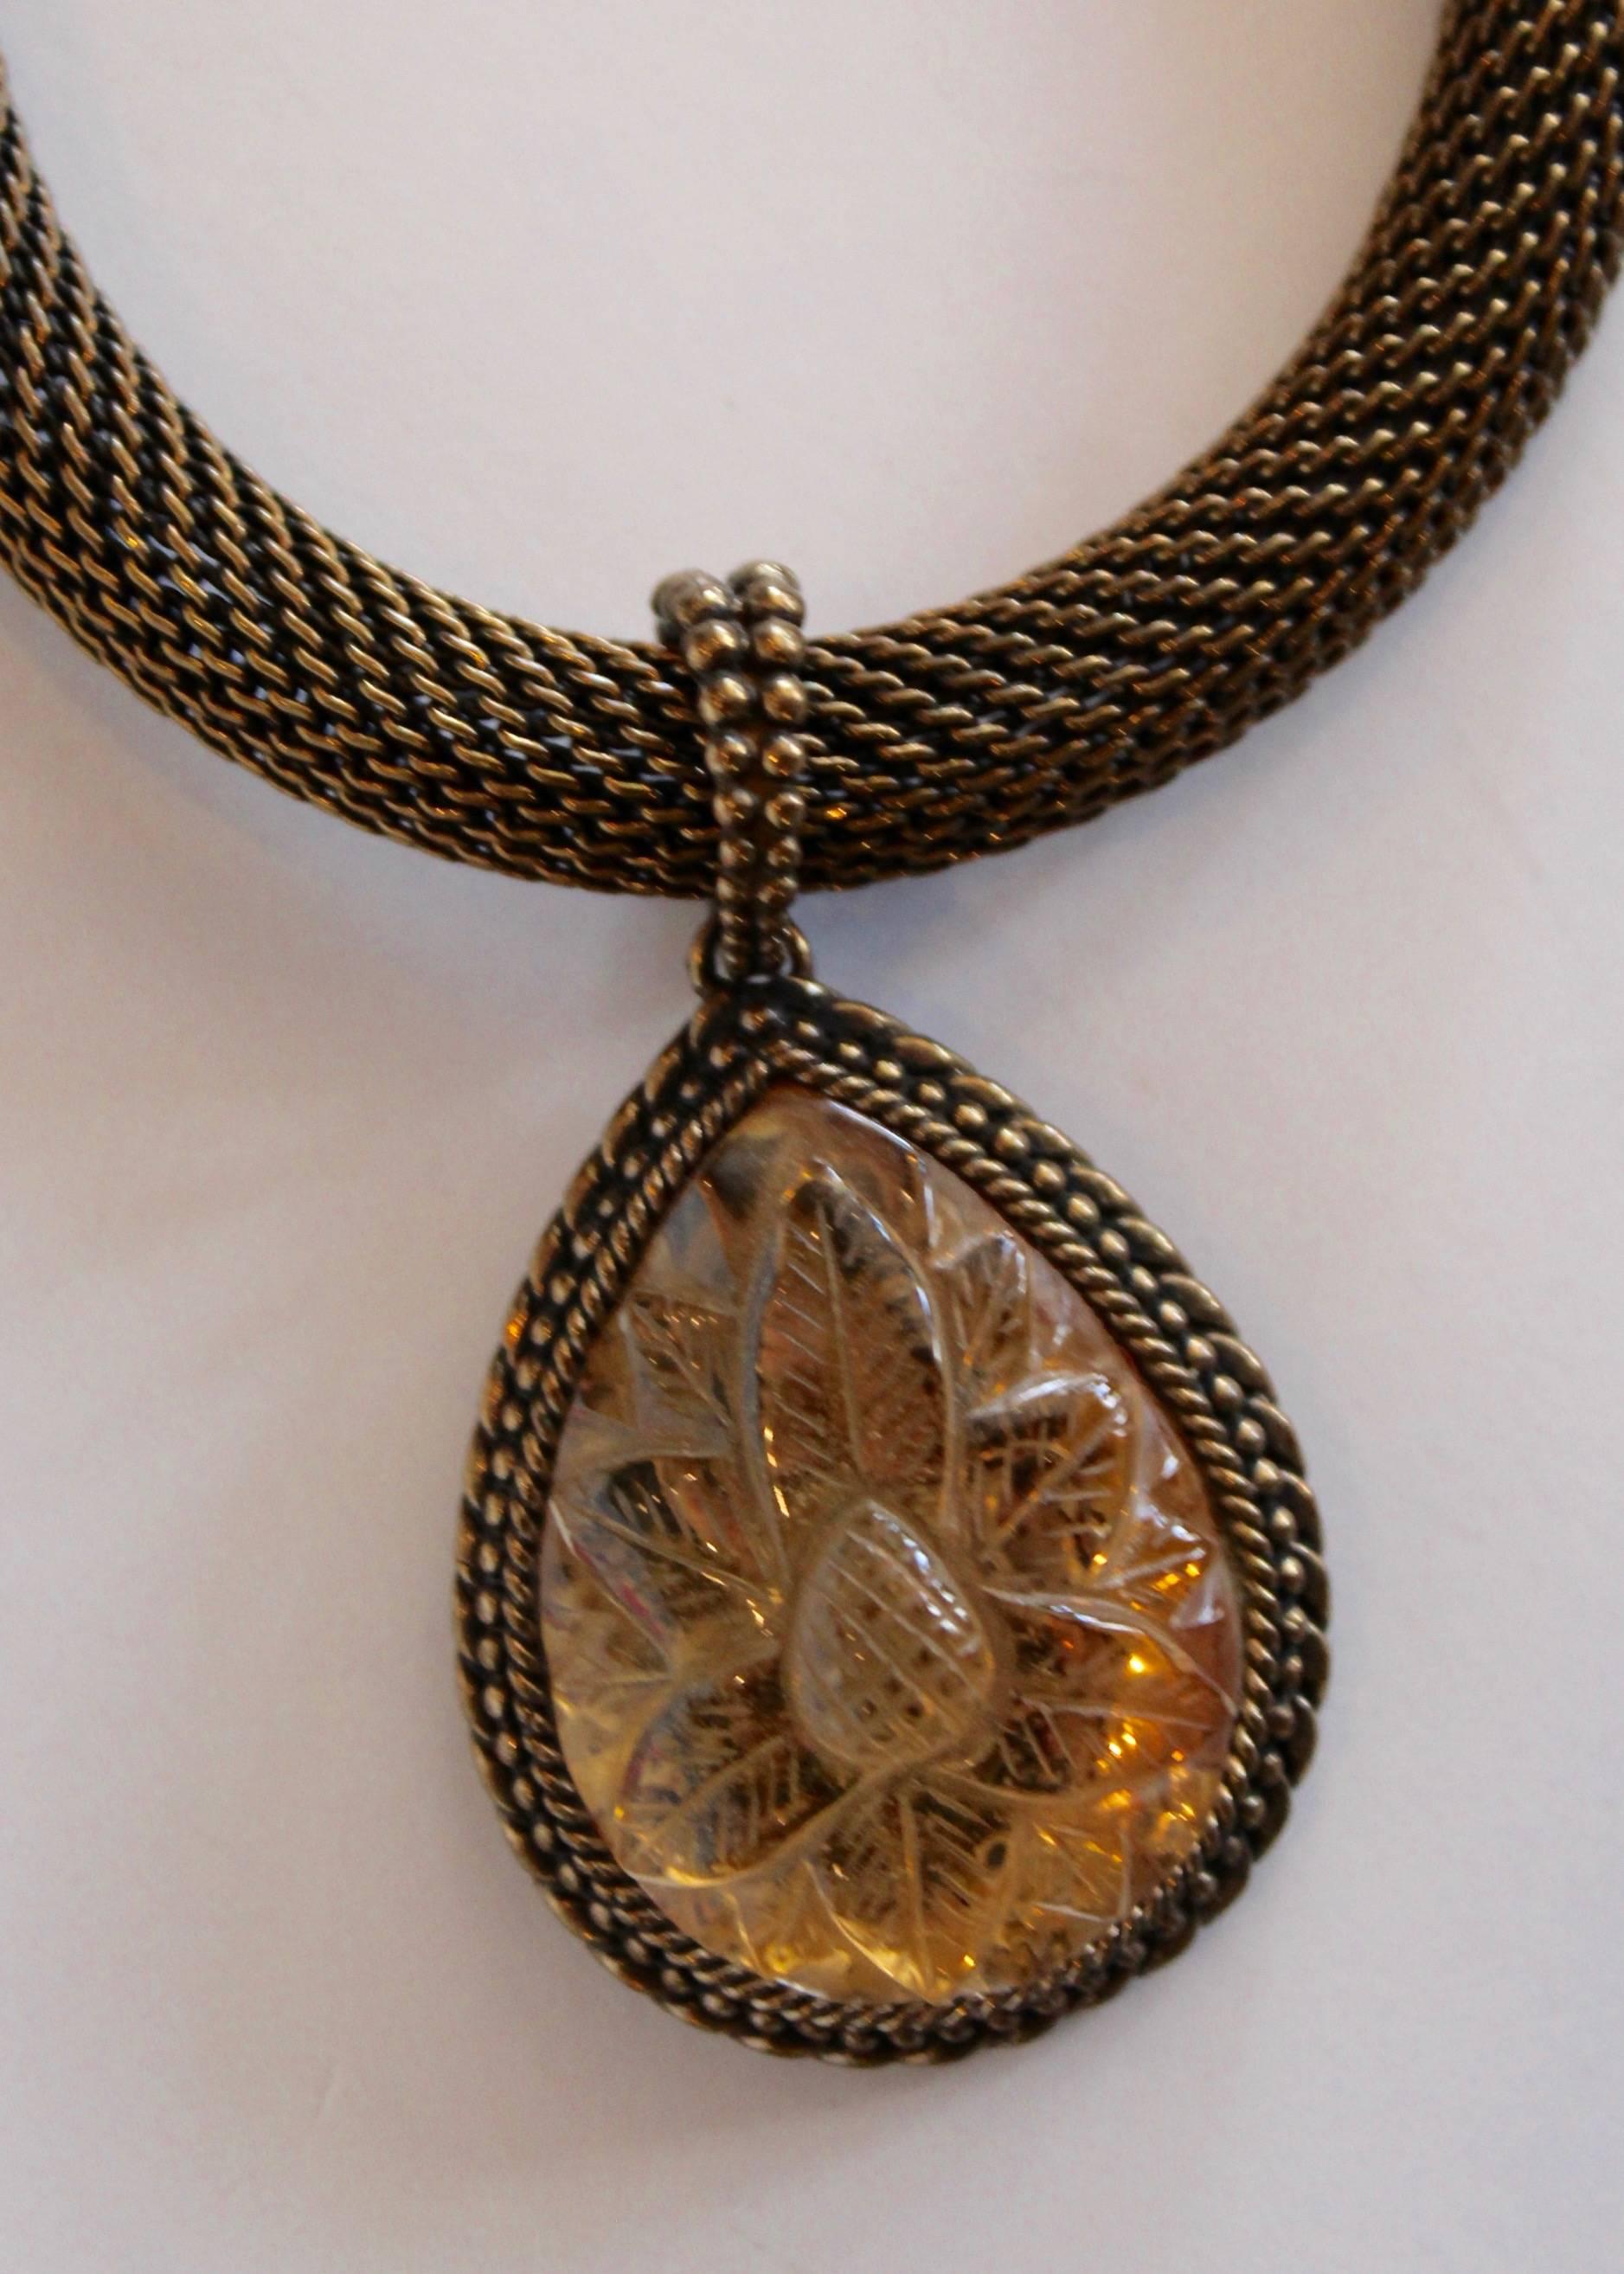 Did you hear? Chokers are back in style! This vintage mesh Stephen Dweck bronze pendant necklace boasts a gorgeous flower intaglio pendant at the center. Toggle closure features intricate floral and studded details.
Necklace length: 16”
Stone